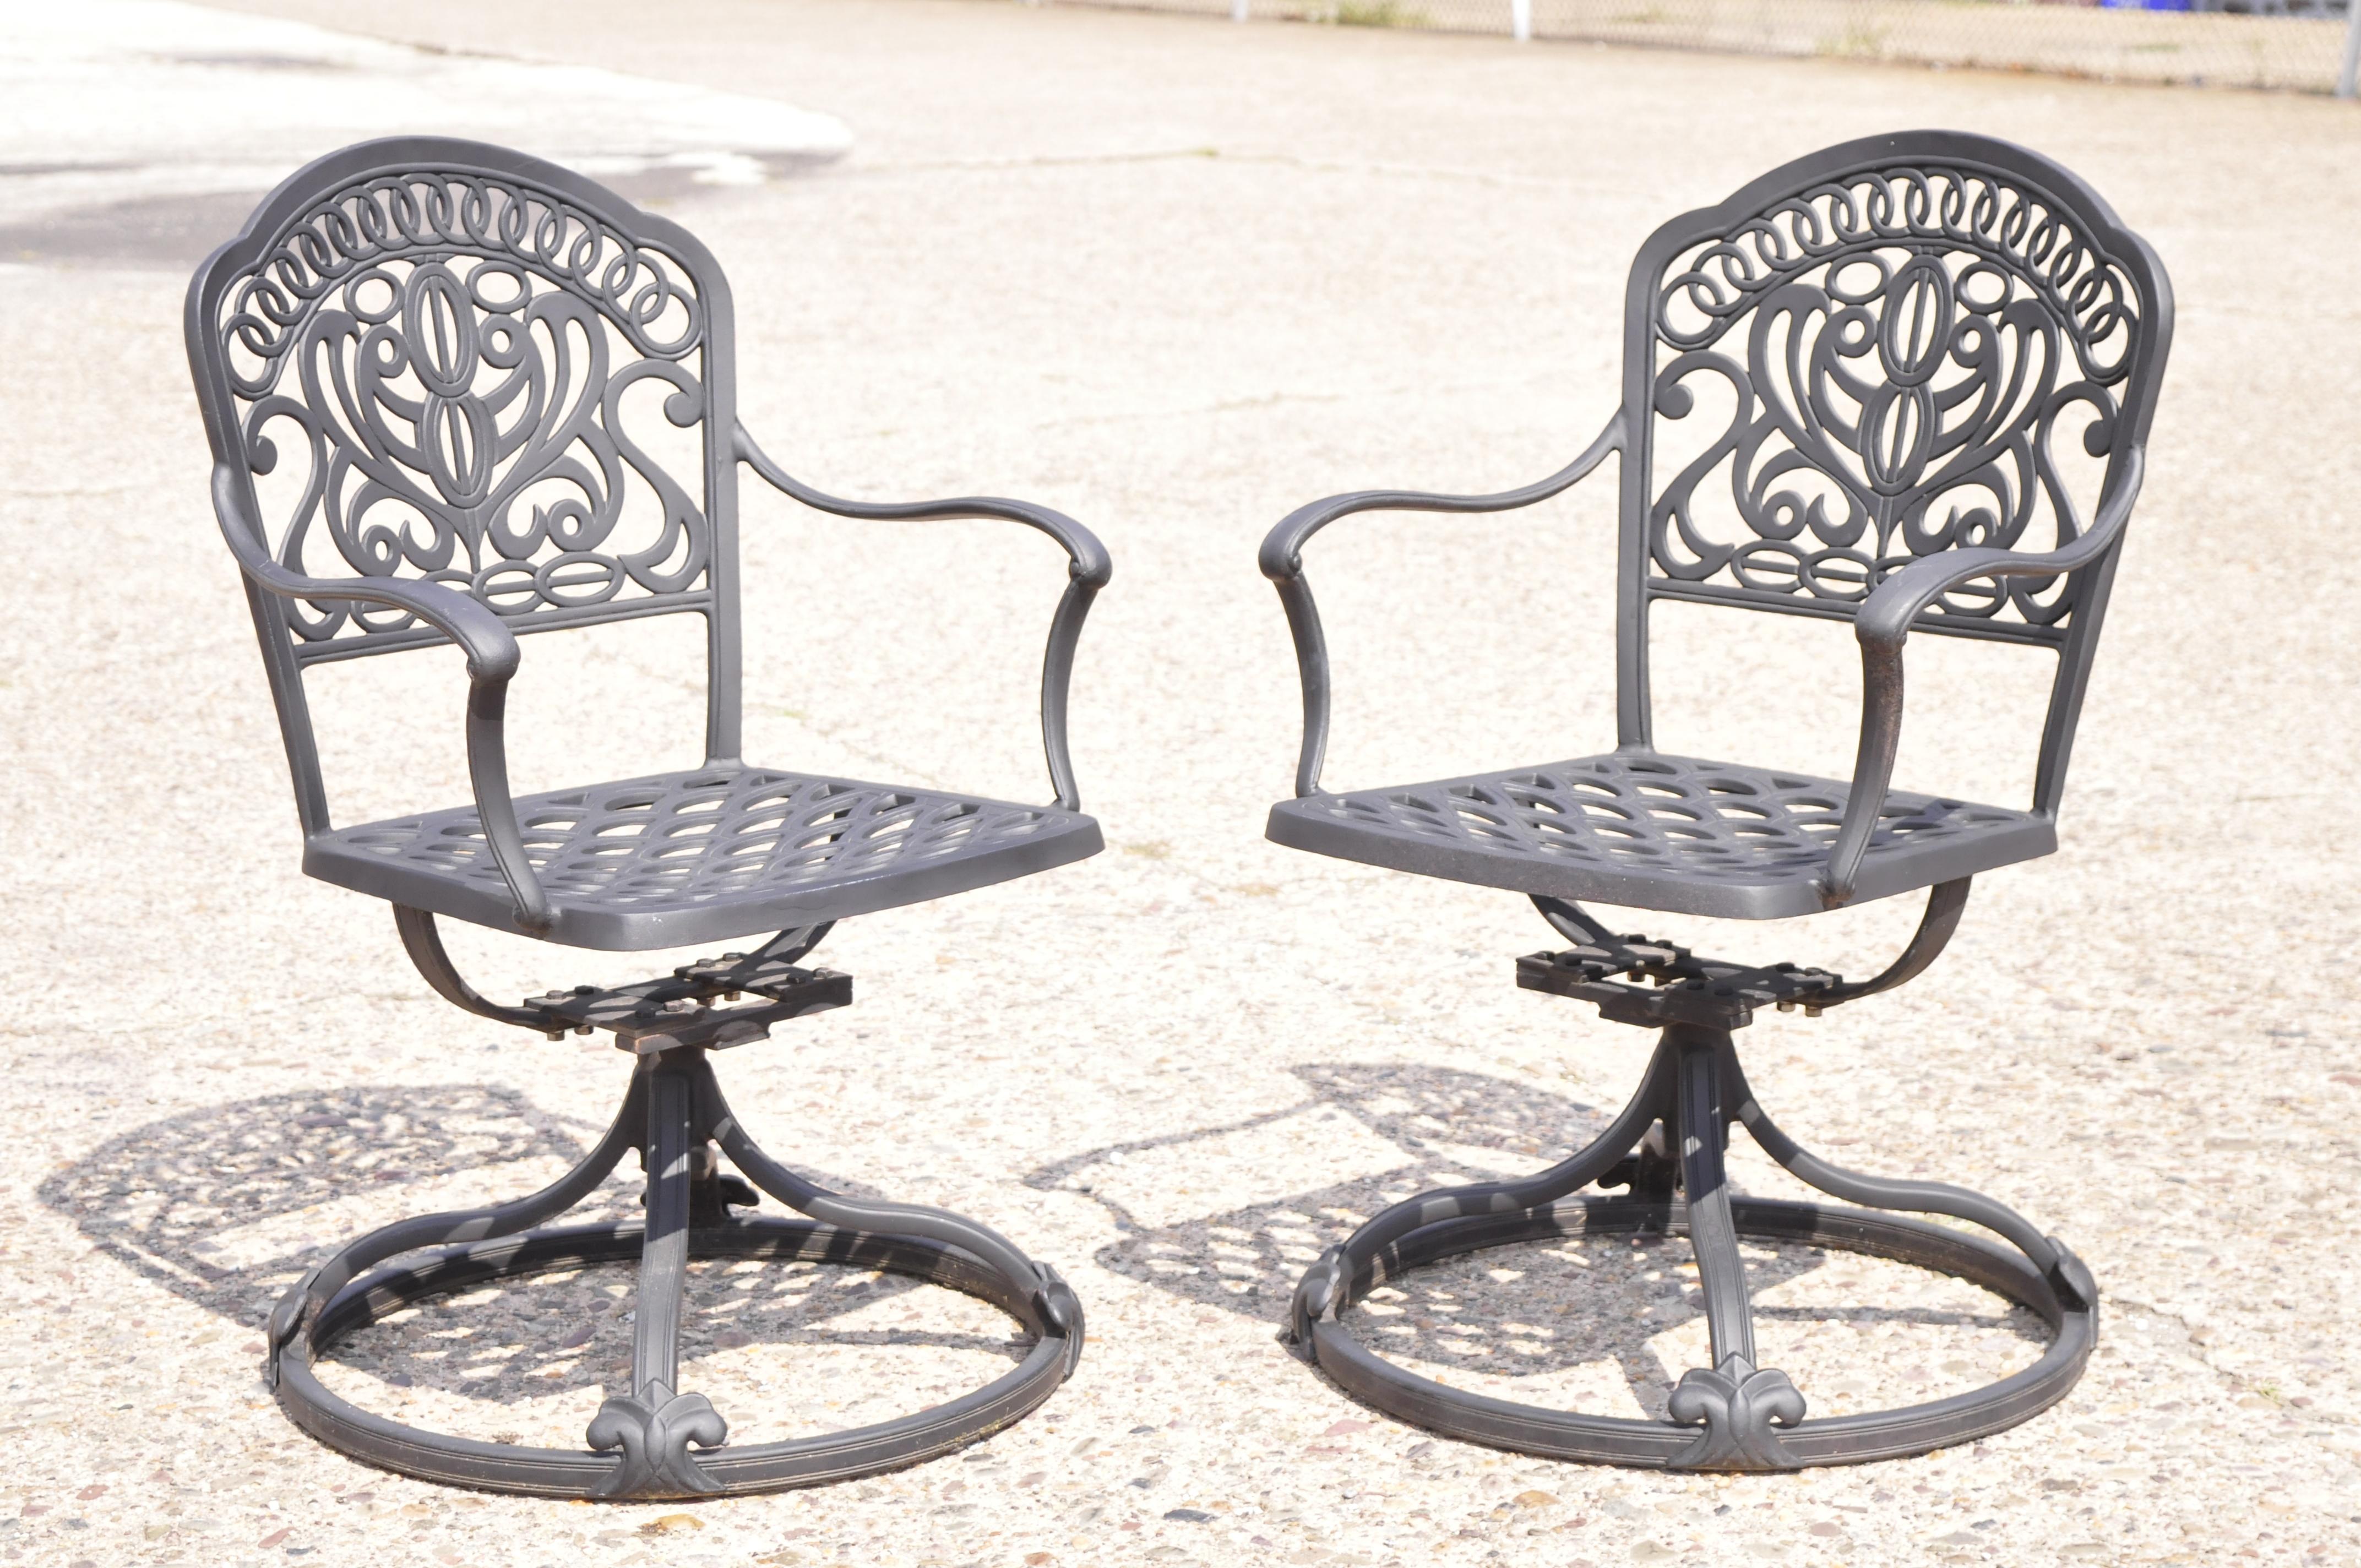 Hanamit Tuscan Swivel Rocker Cast Aluminum Patio dining chair - a pair. Item features swivel and tilt pedestal base, cast aluminum construction, very nice pair, great style and form. 21st Century, Pre-owned. Measurements: 35